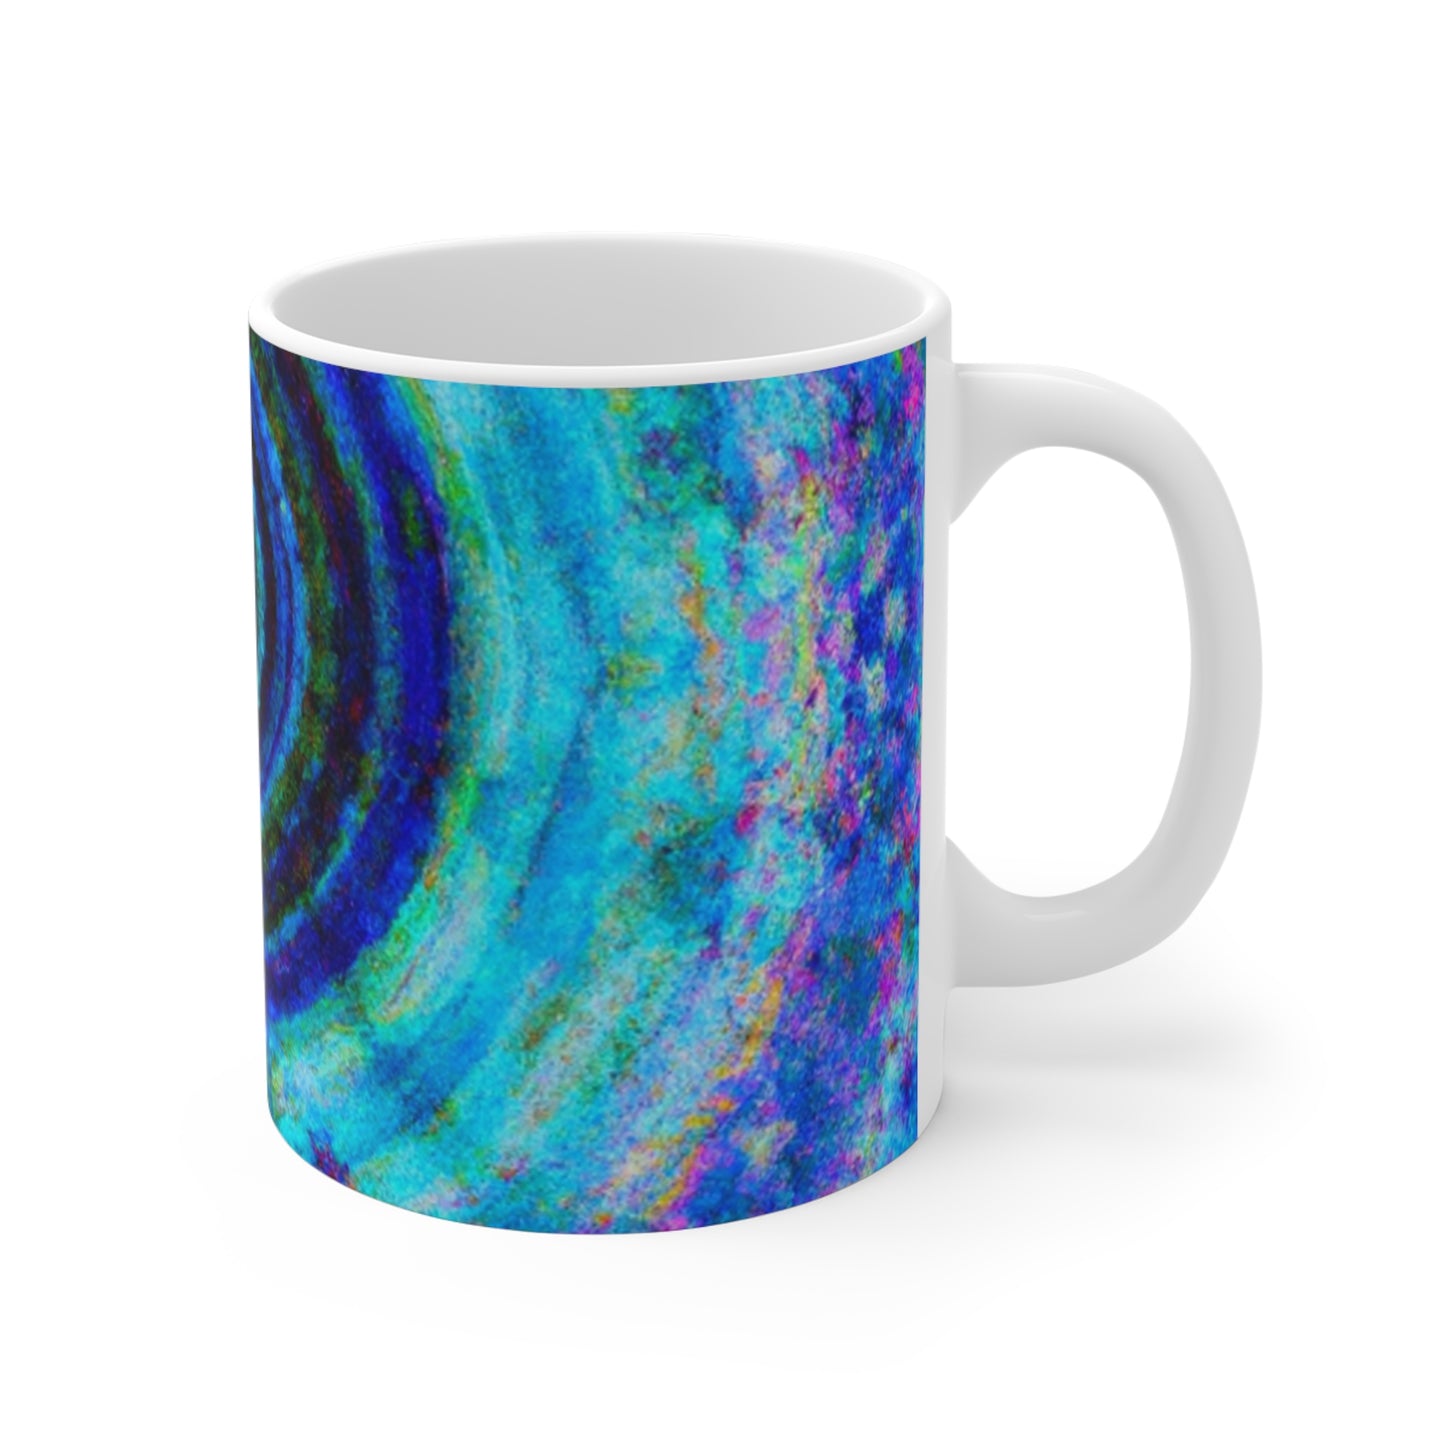 MaryBrew Coffee Company - Psychedelic Coffee Cup Mug 11 Ounce